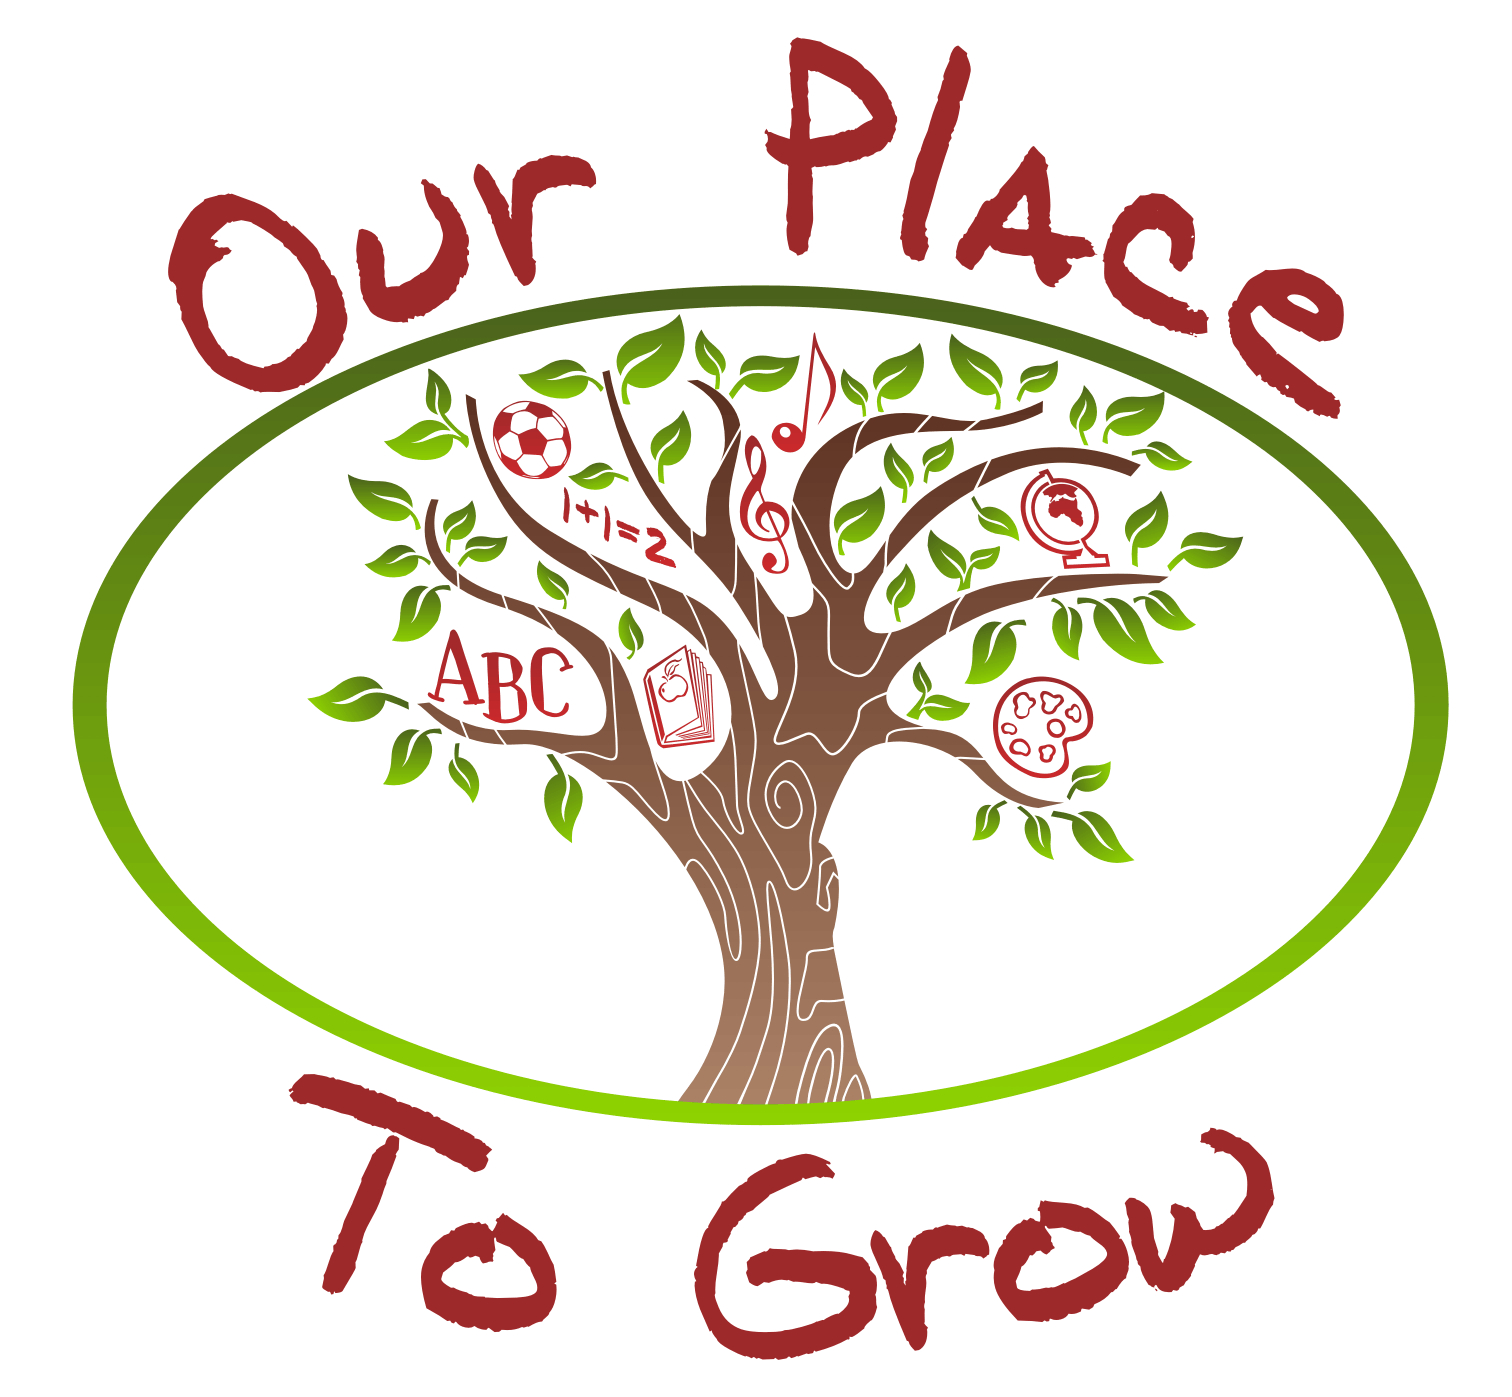 Our Place to Grow Children's Center